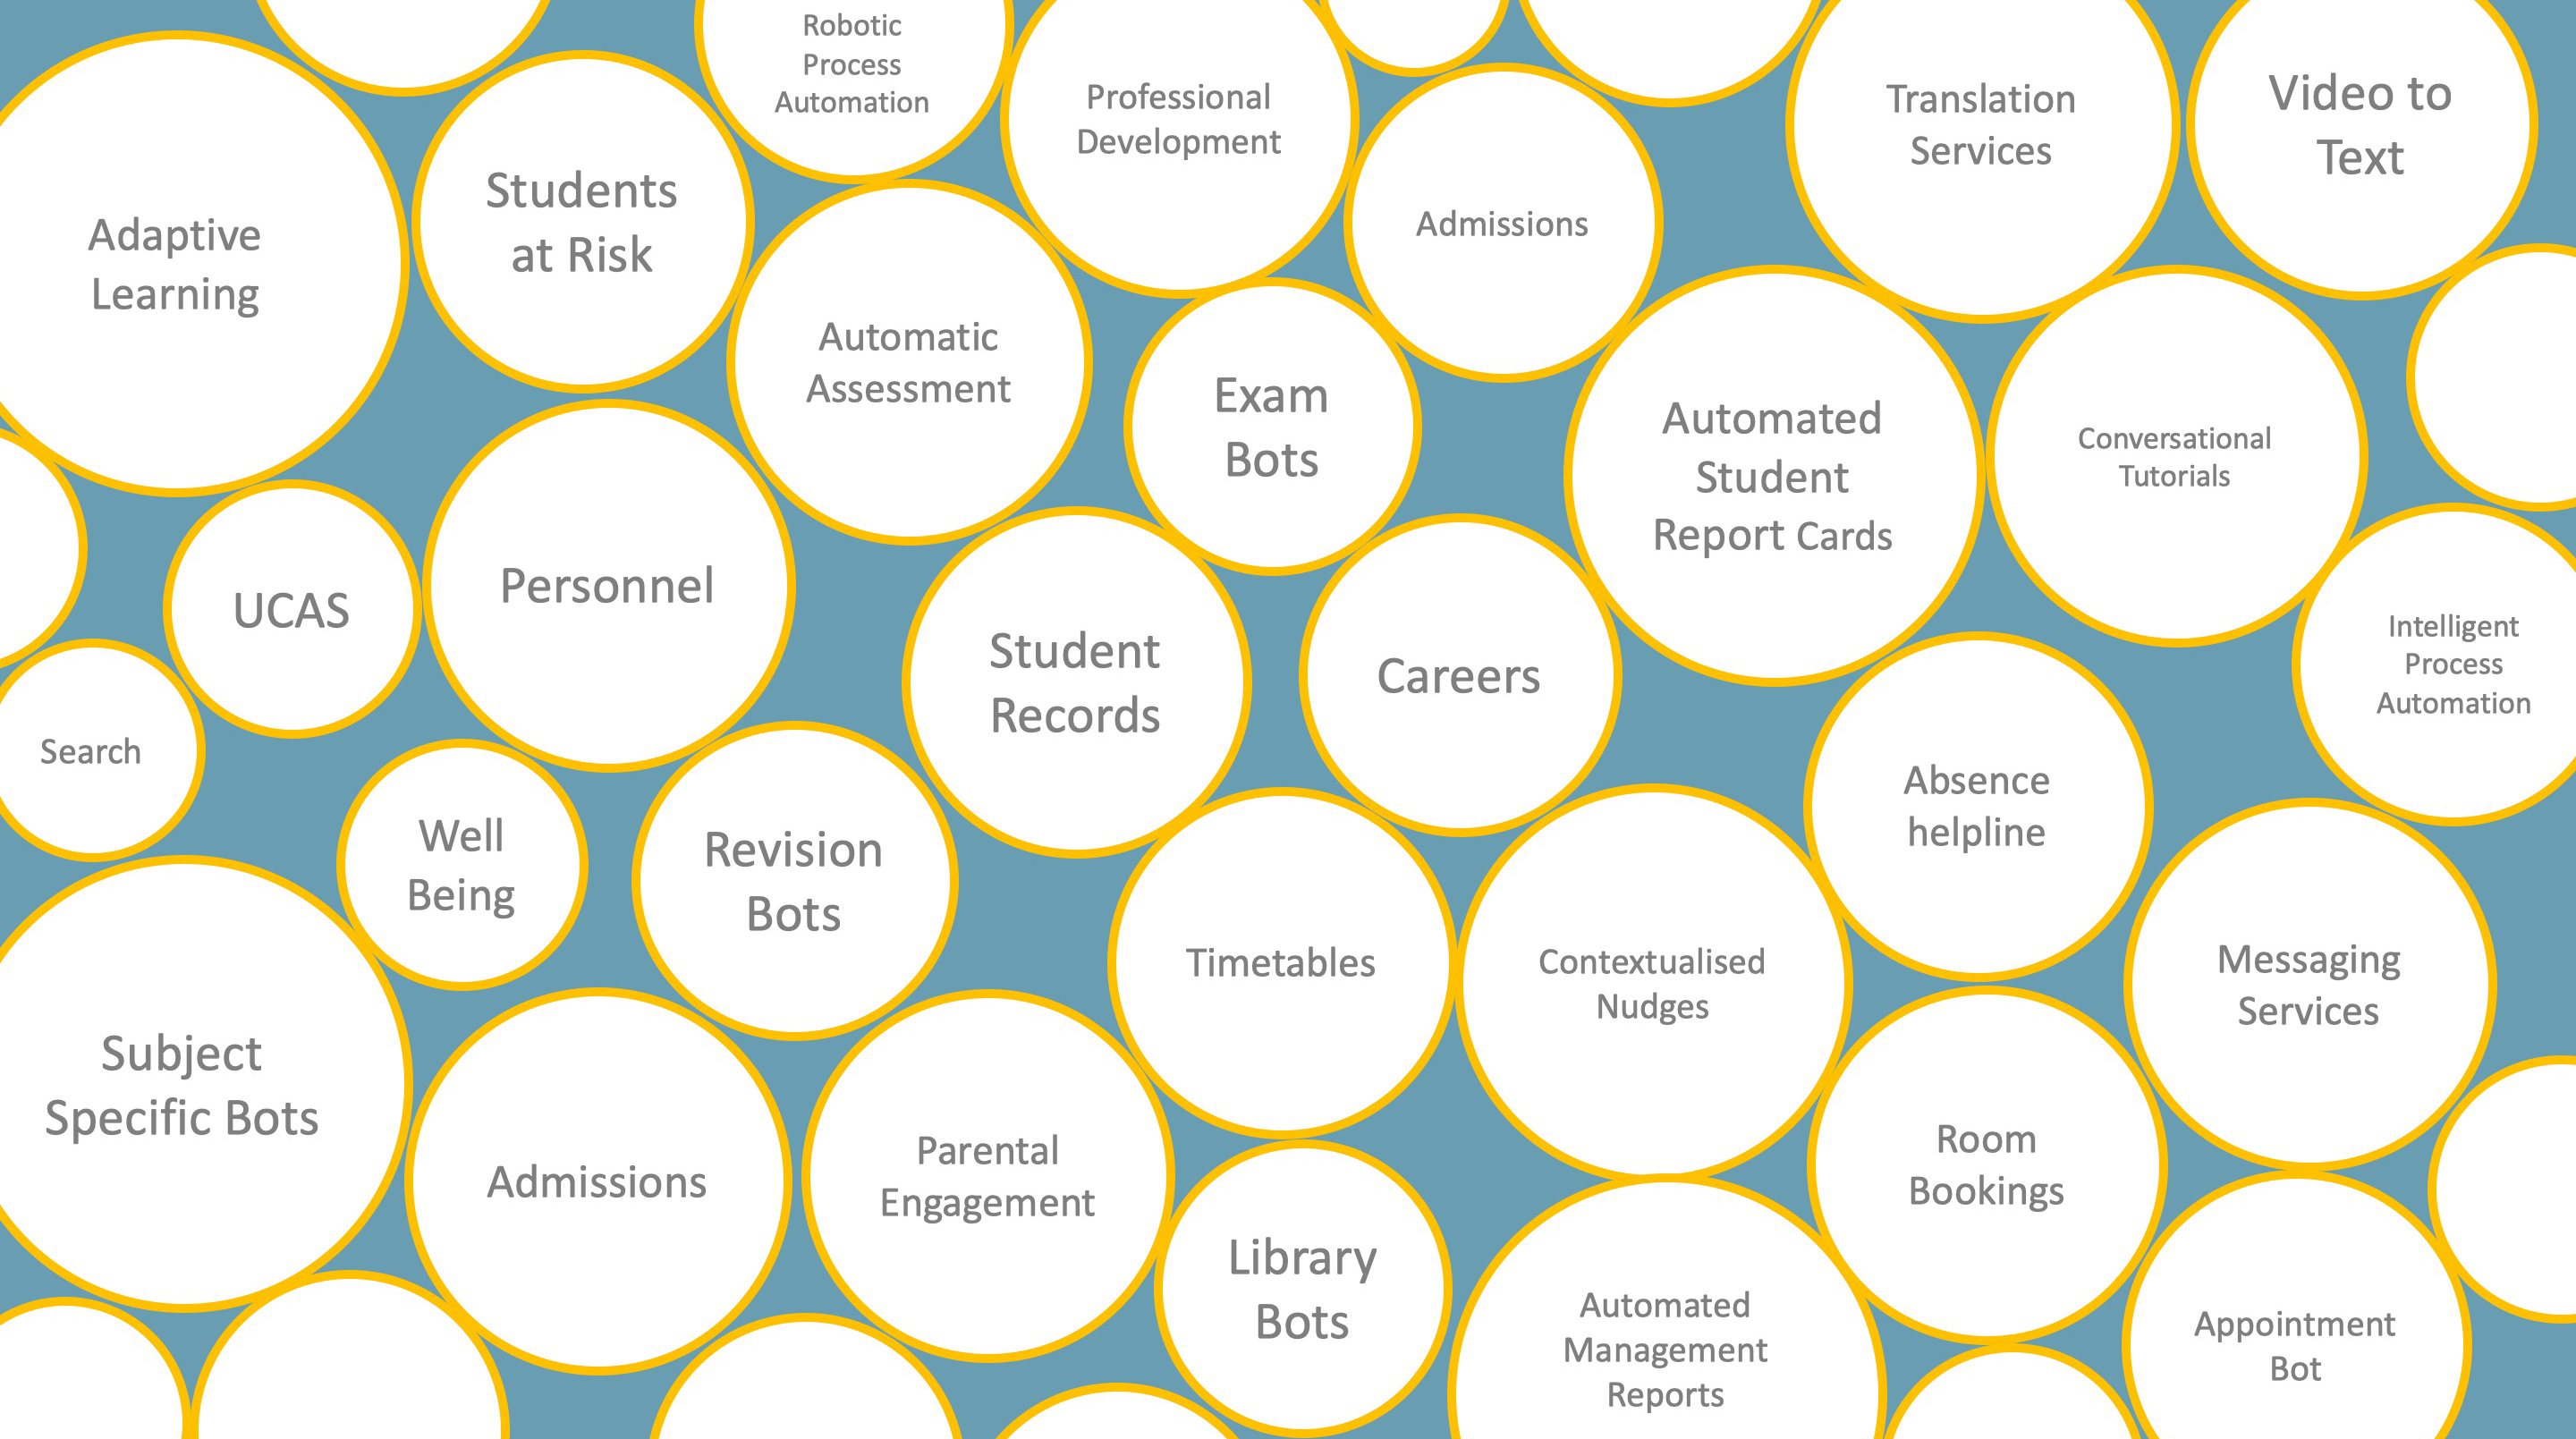 Some of the services that can be delivered by a campus digital assistant.